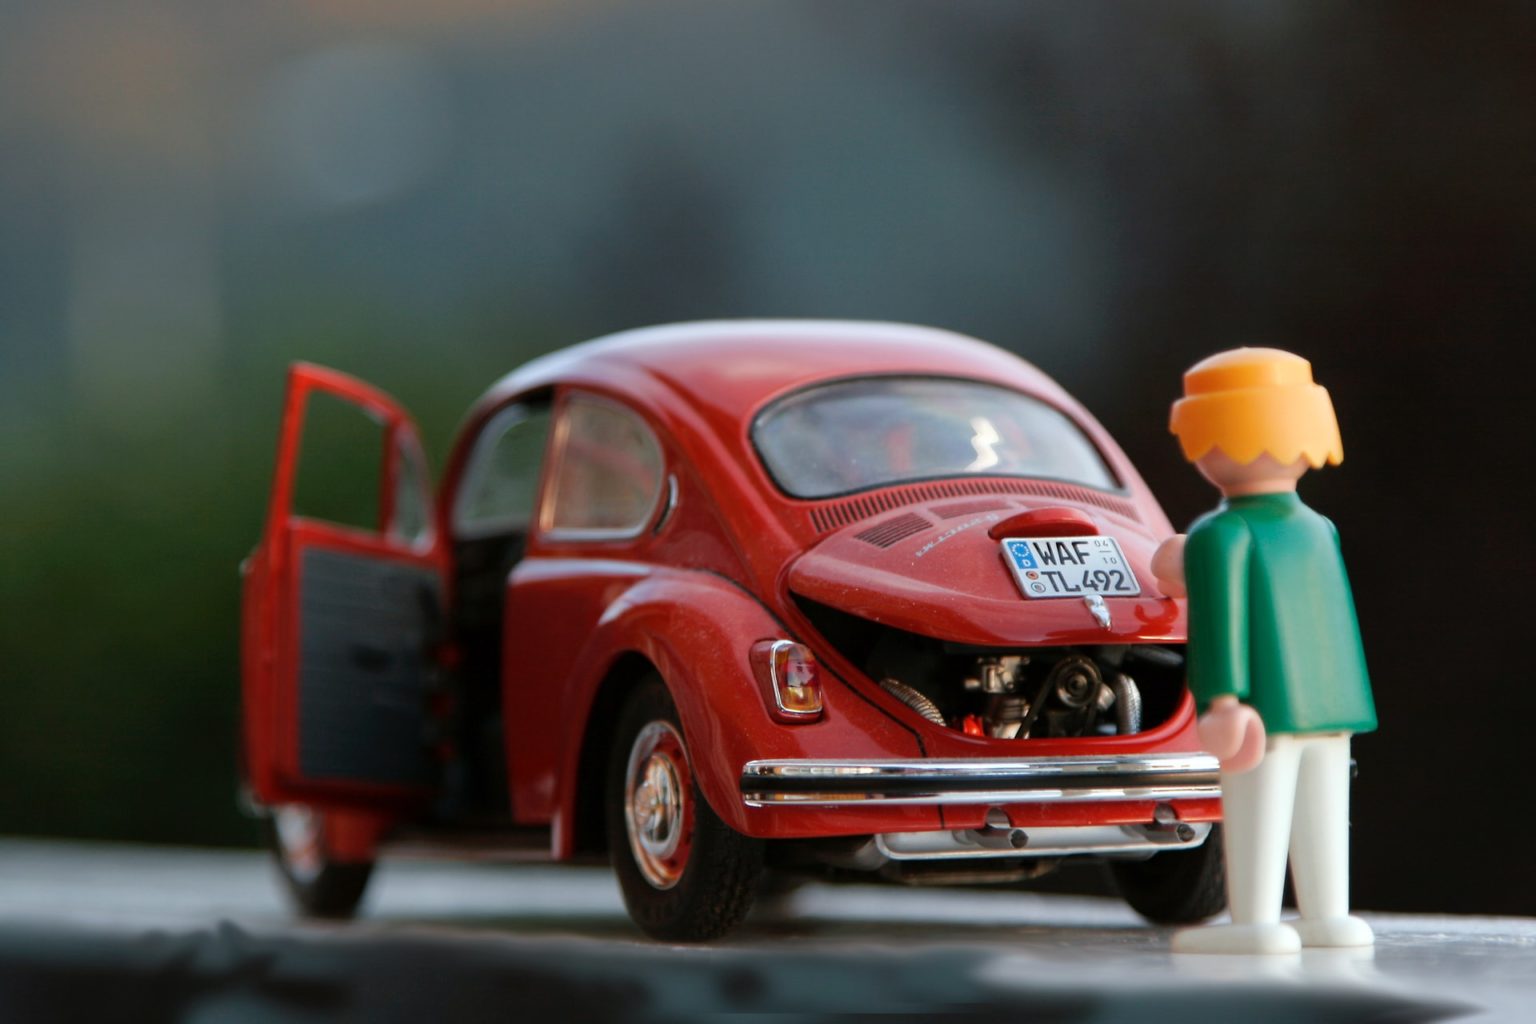 a toy figure next to a red car